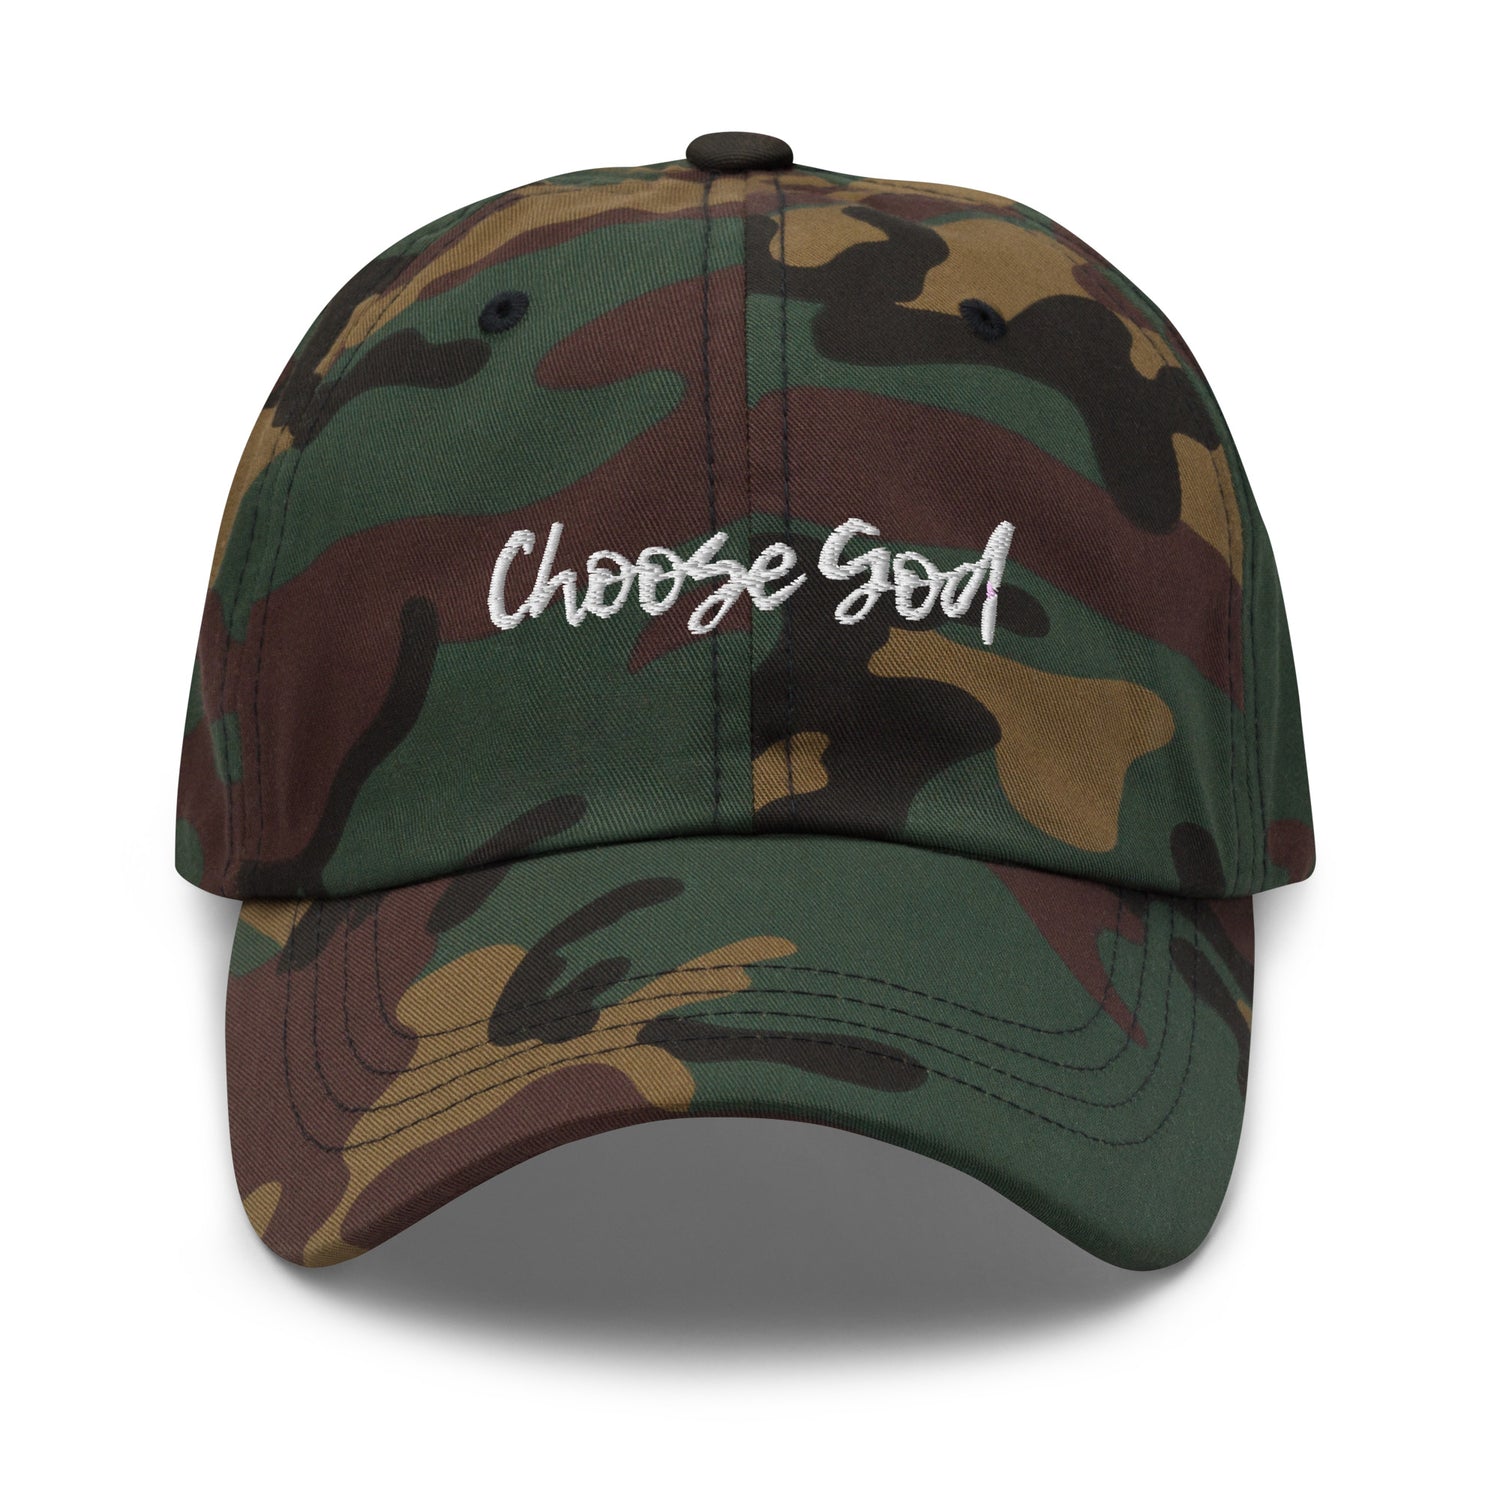 Christian hat camo green color